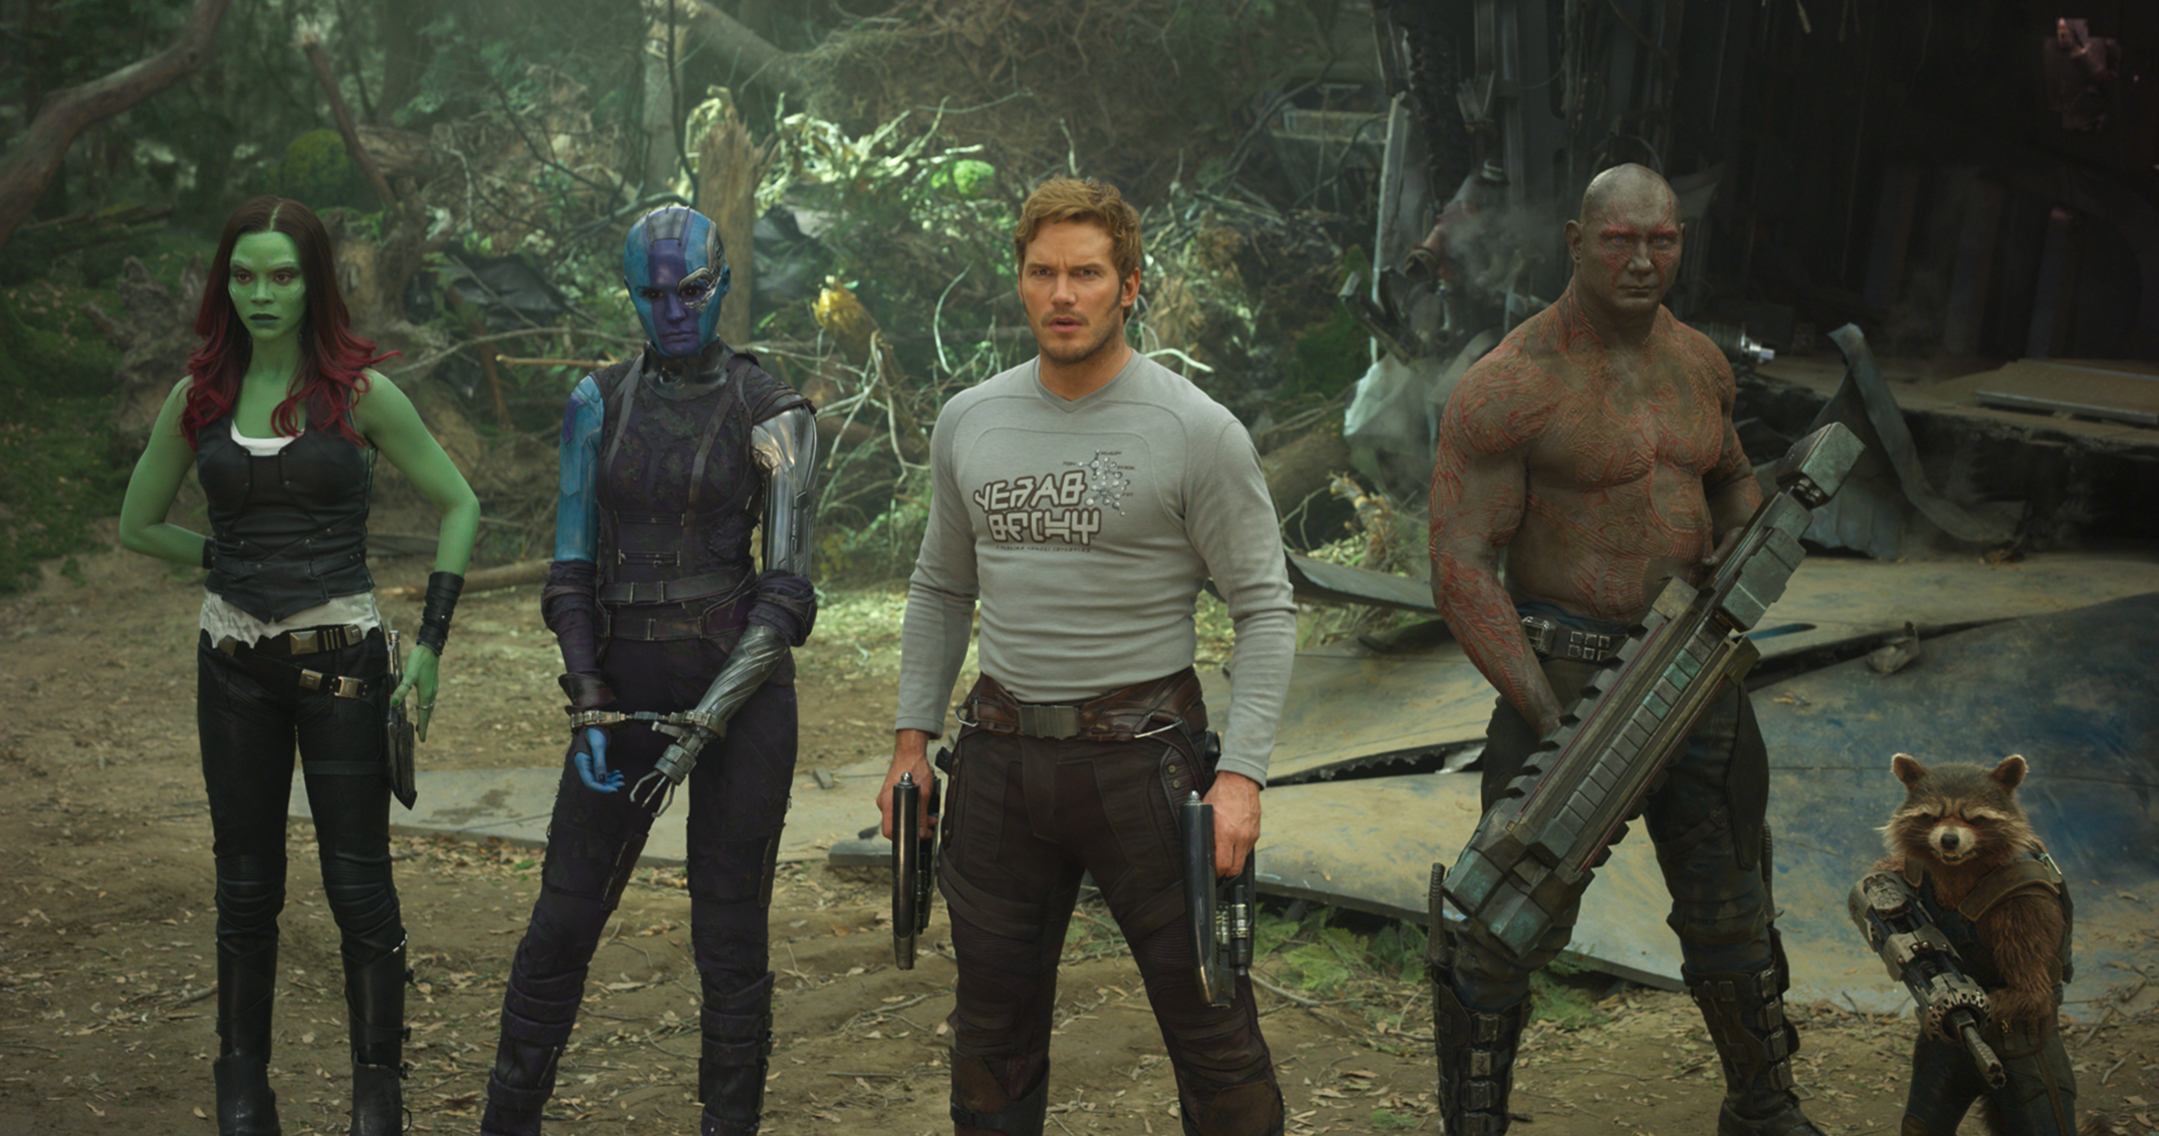 Review Guardians Of The Galaxy Vol 2